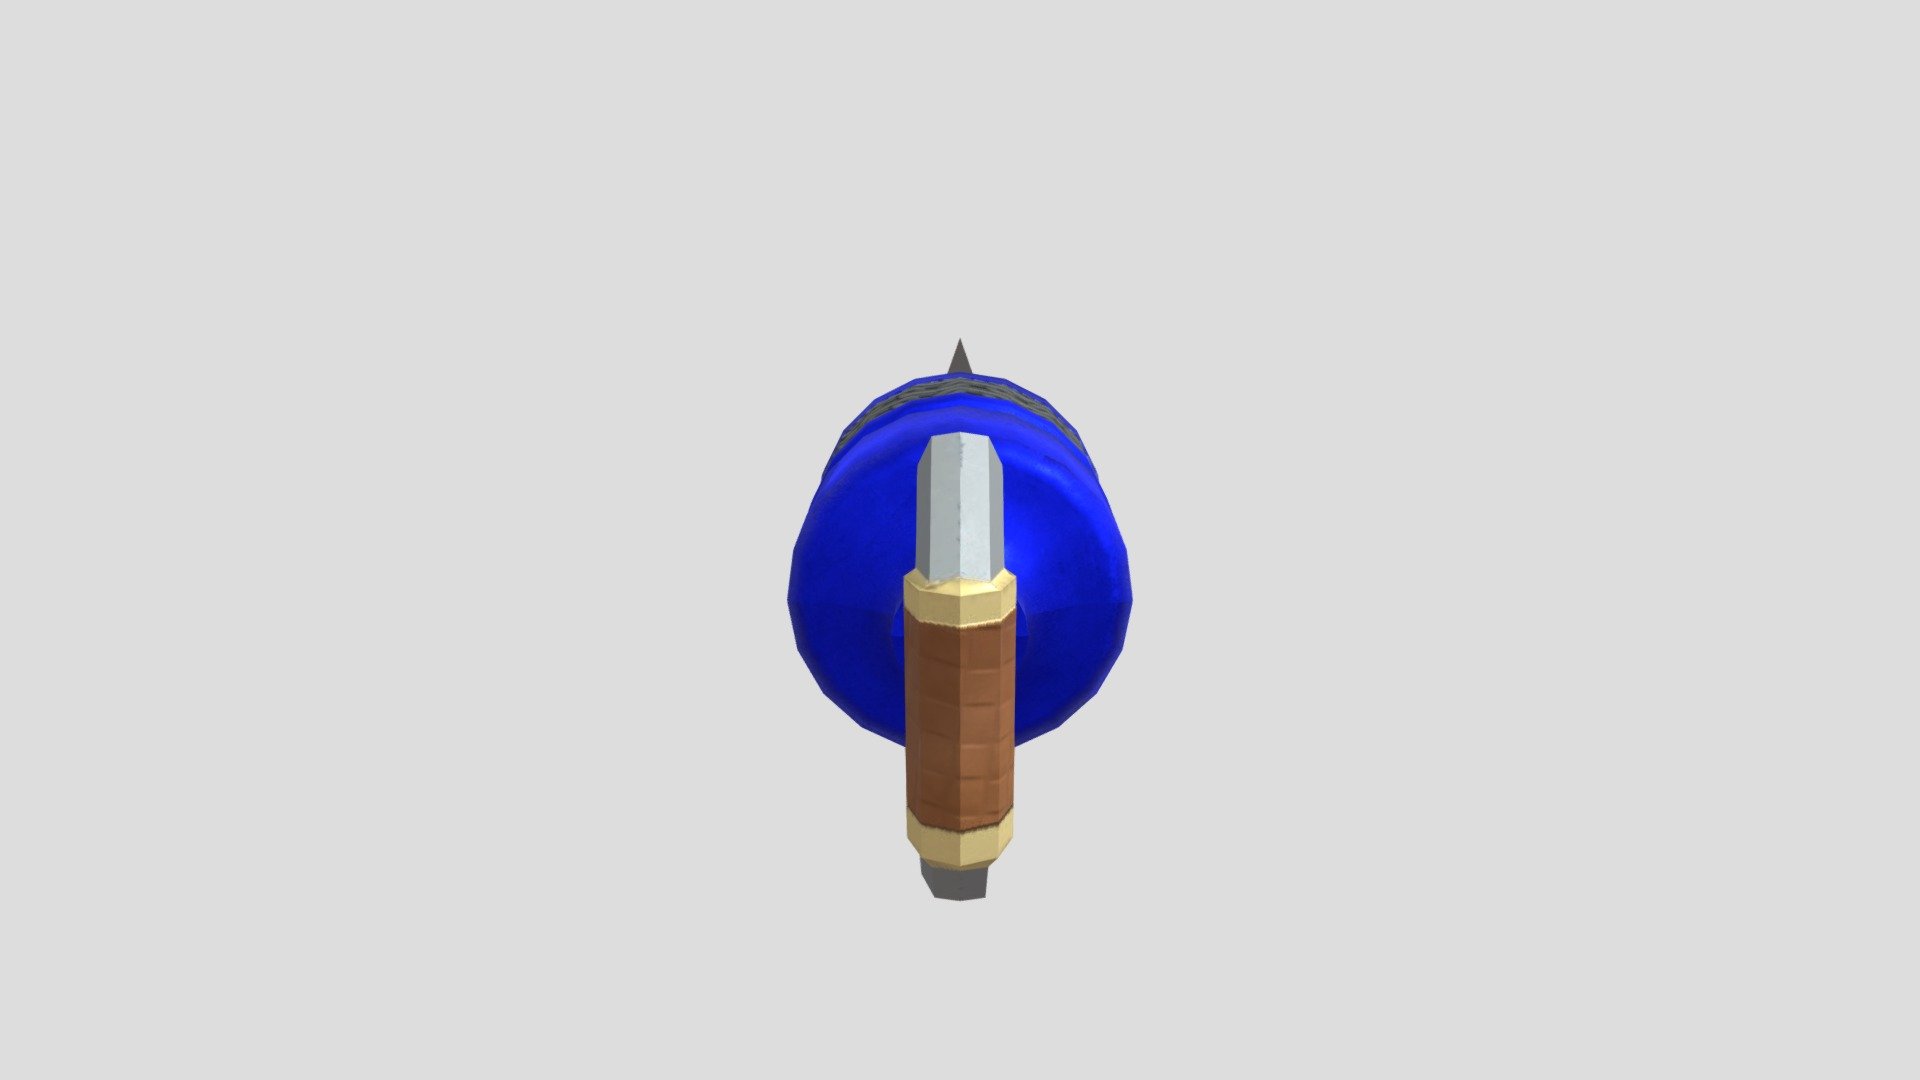 A model of the Hookshot from The Legend of Zelda Ocarina of Time that I made as an assignment for my 3D Animation Course - Hookshot - 3D model by SunsetHoliday 3d model